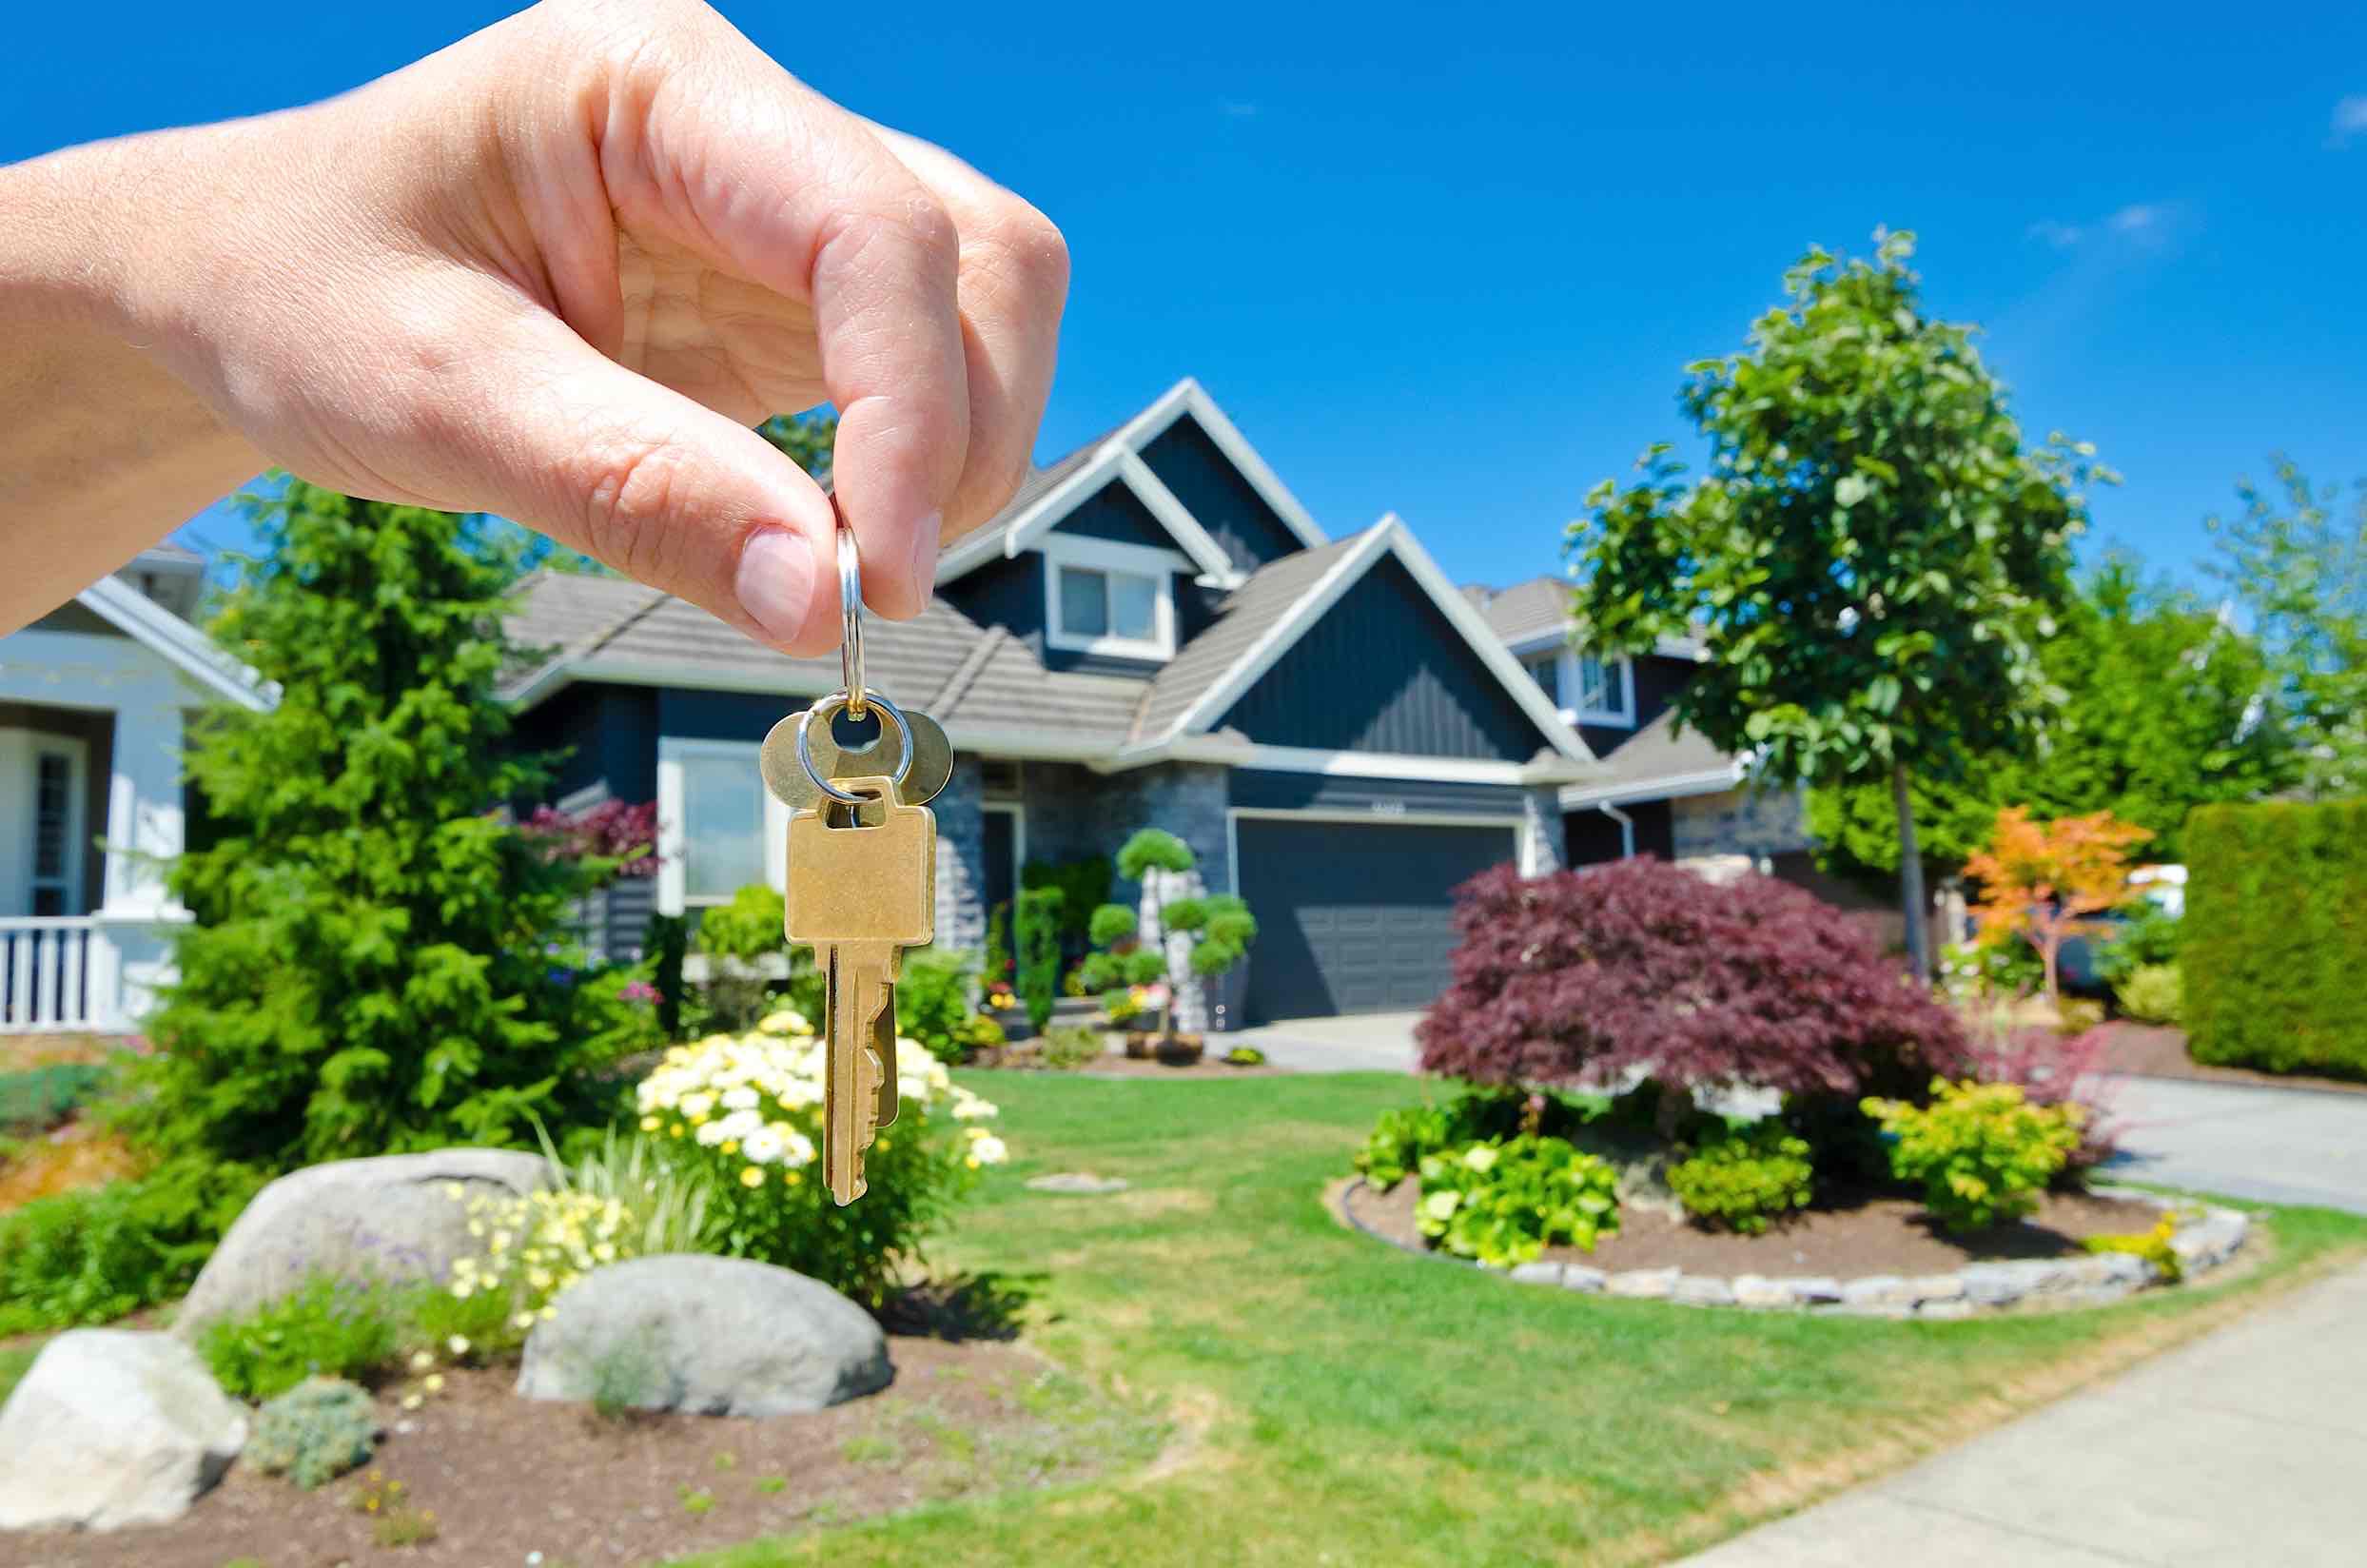 WHAT'S IN STORE FOR THE SPRING REAL ESTATE MARKET - Princeton Real Estate